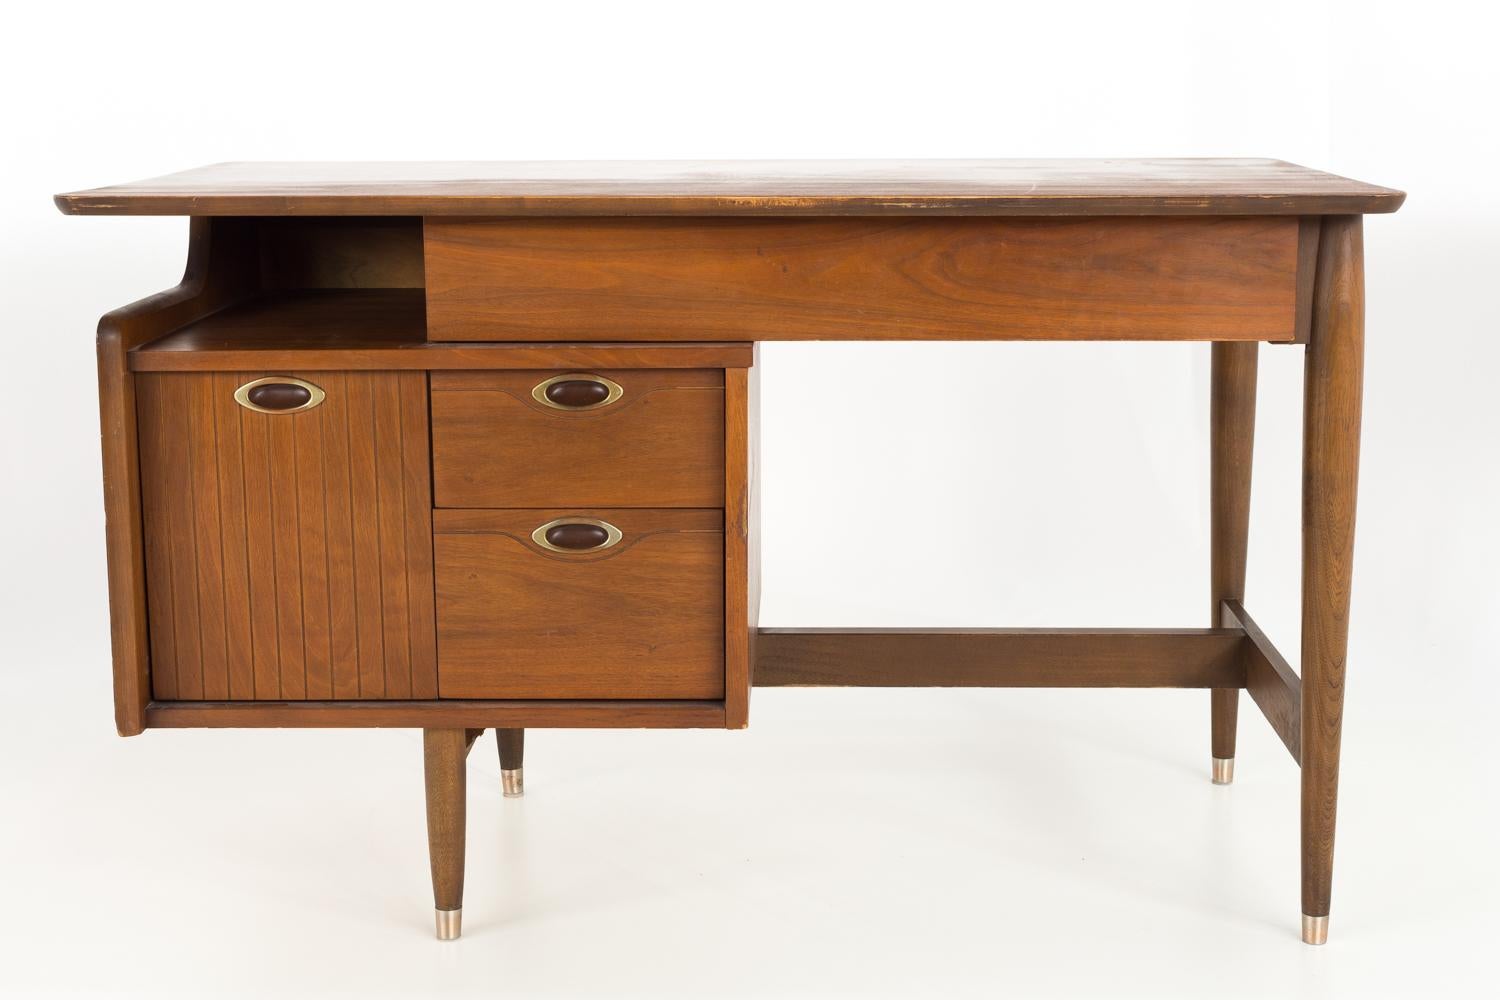 Mainline by Hooker mid century single sided floating display desk

This desk measures: 49 wide x 25 deep x 30.25 inches high, with a chair clearance of 23.5 inches

All pieces of furniture can be had in what we call restored vintage condition.